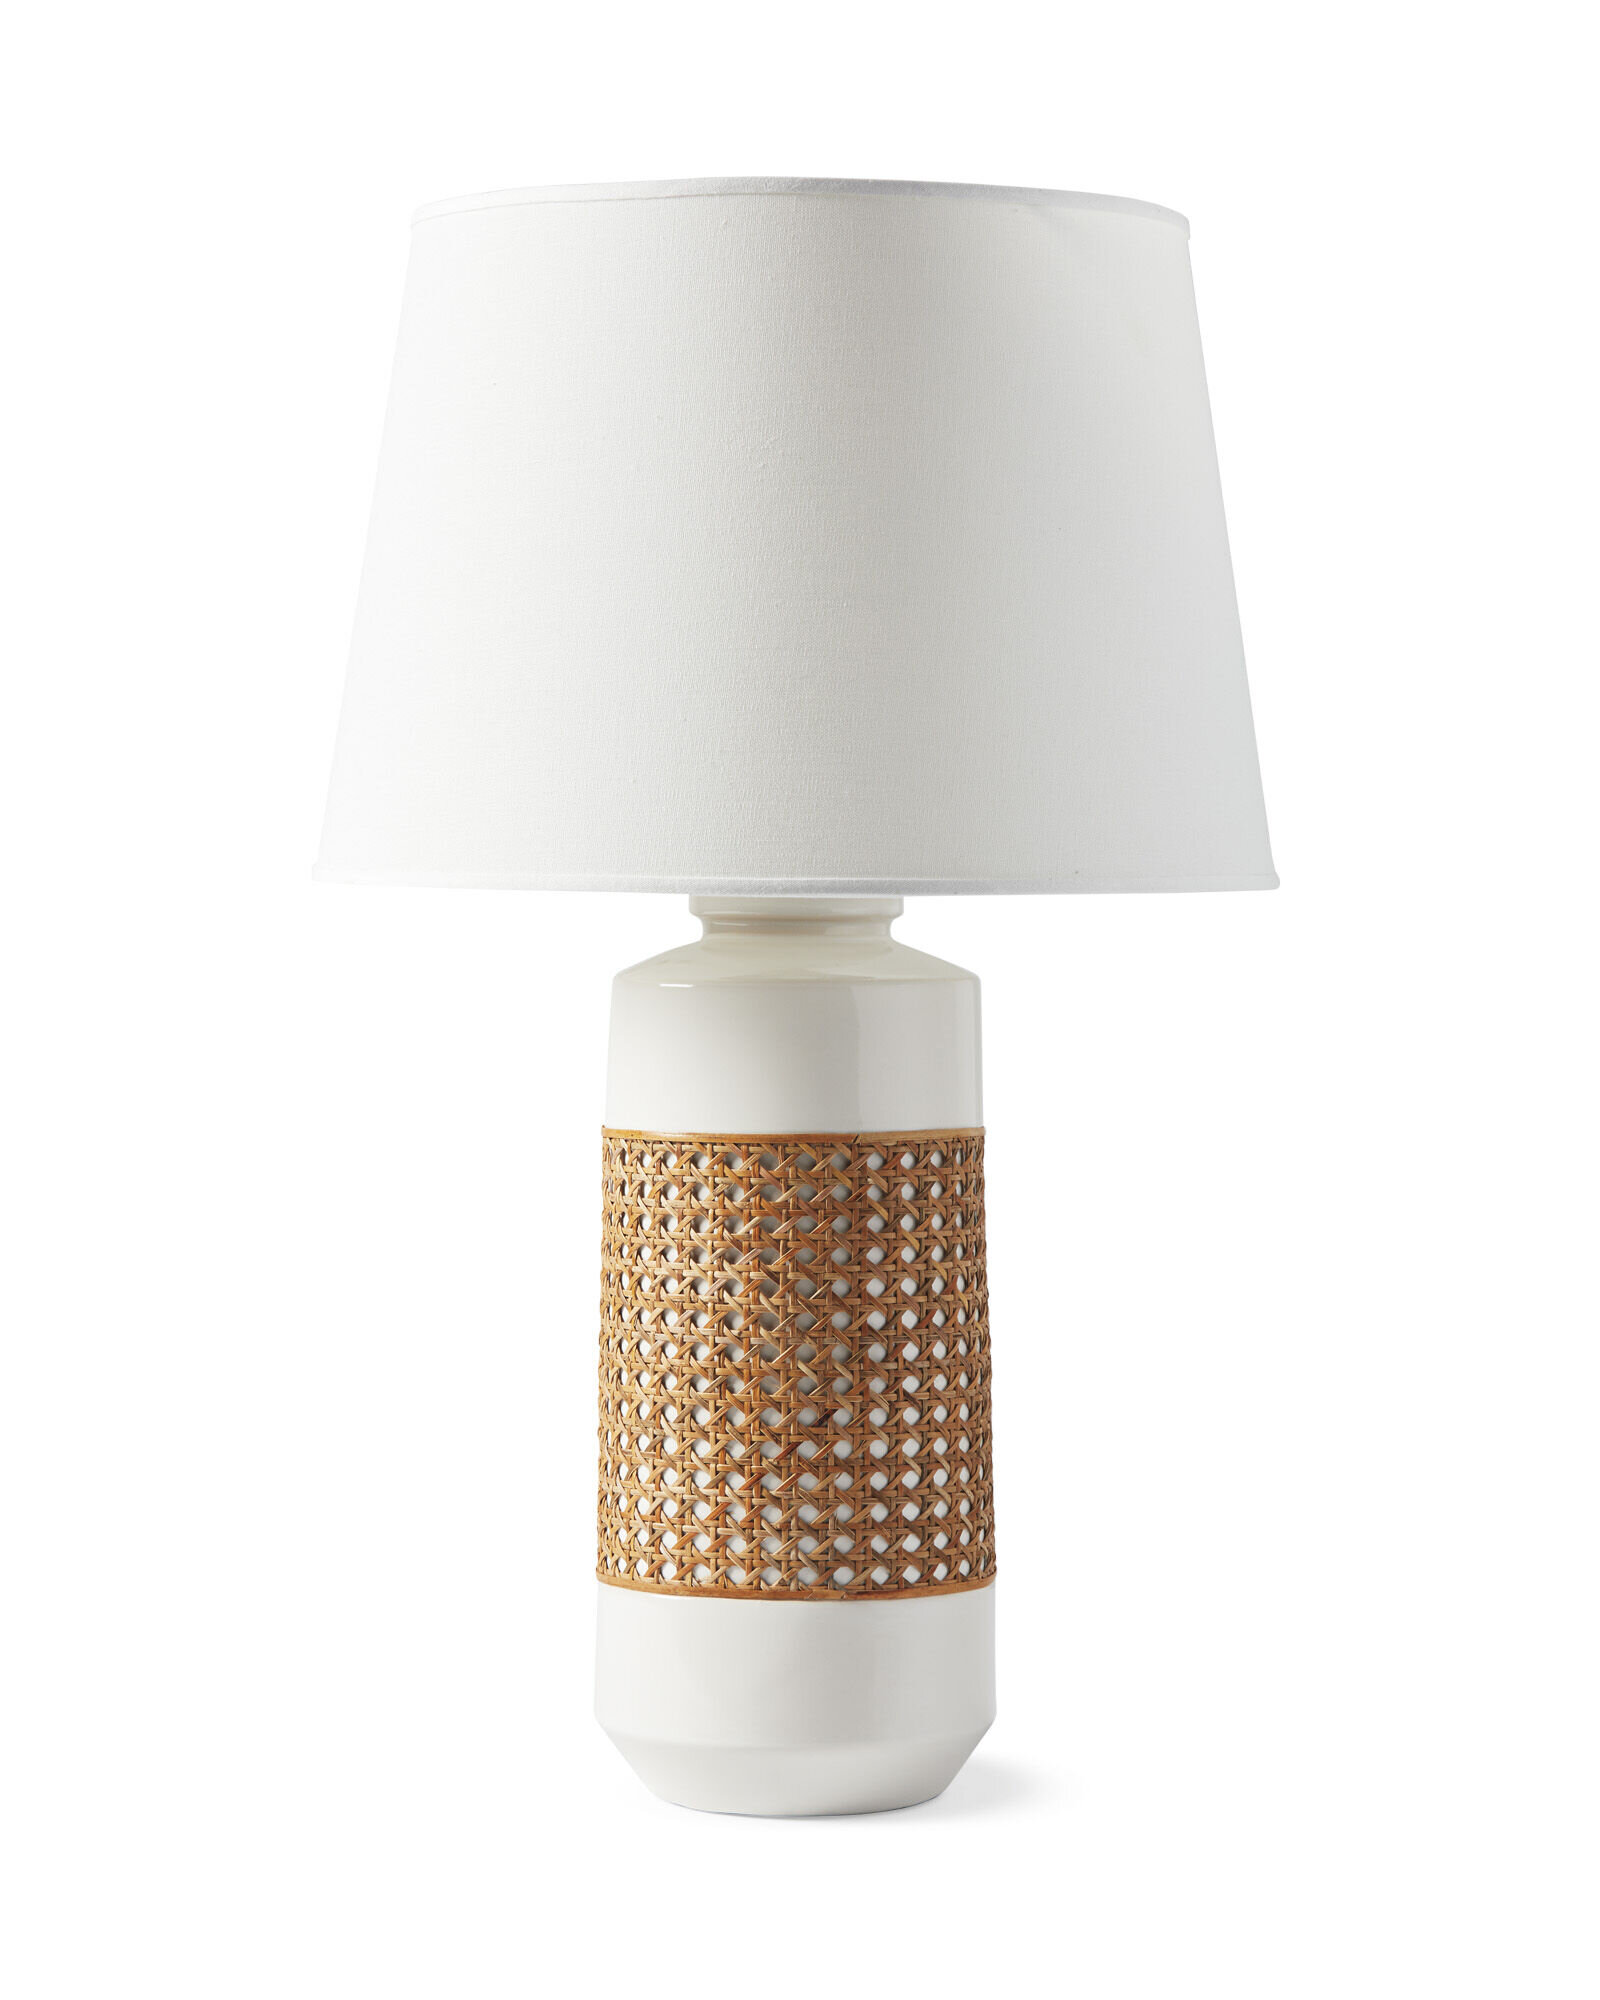 Round Hill Table Lamp - Serena and Lily.jpeg